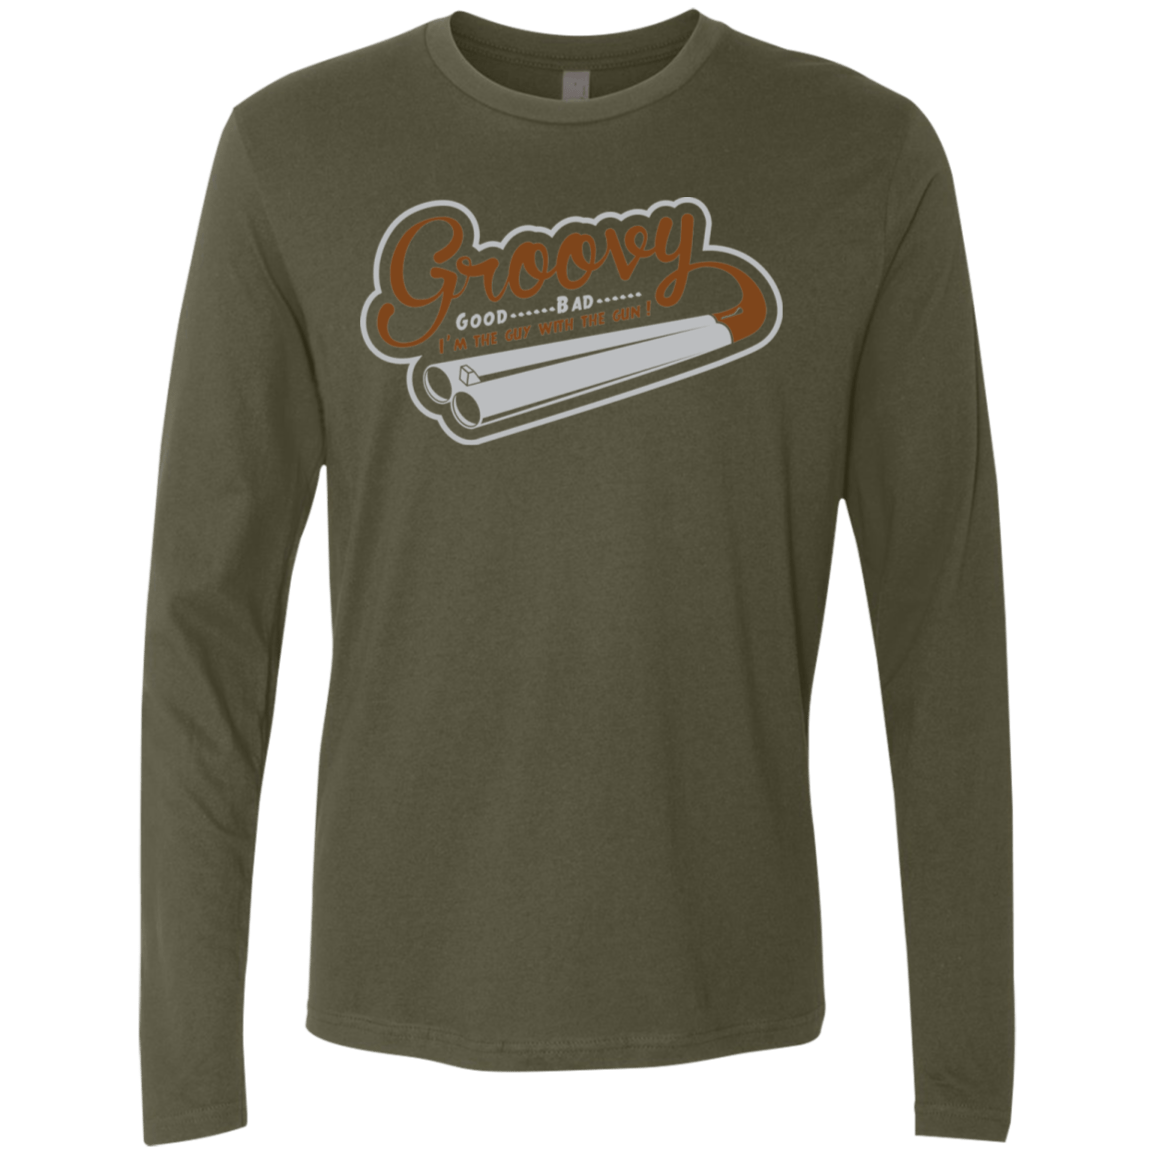 T-Shirts Military Green / S The Guy With The Gun Men's Premium Long Sleeve